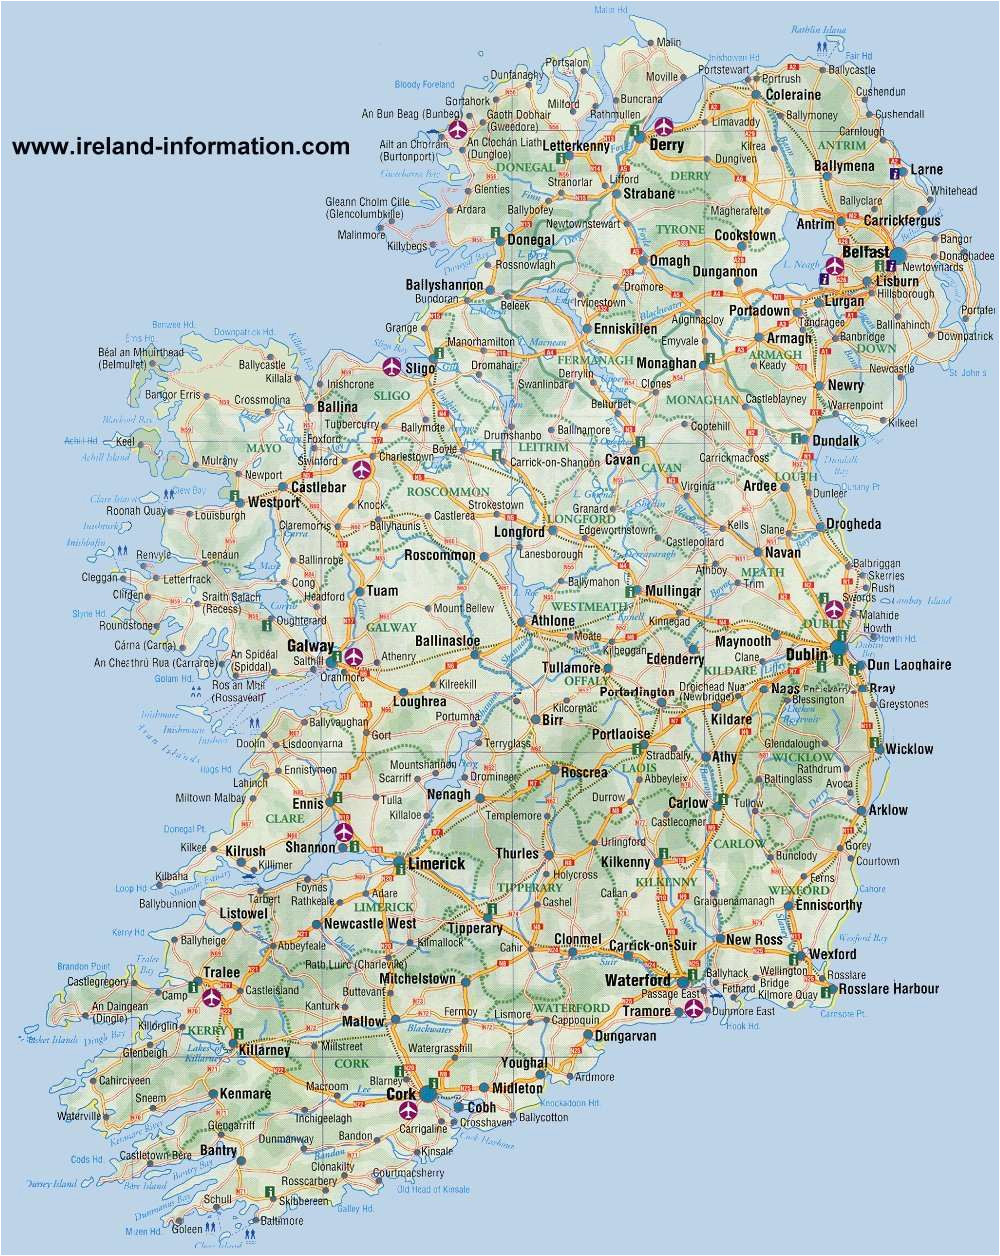 most popular tourist attractions in ireland free paid attractions